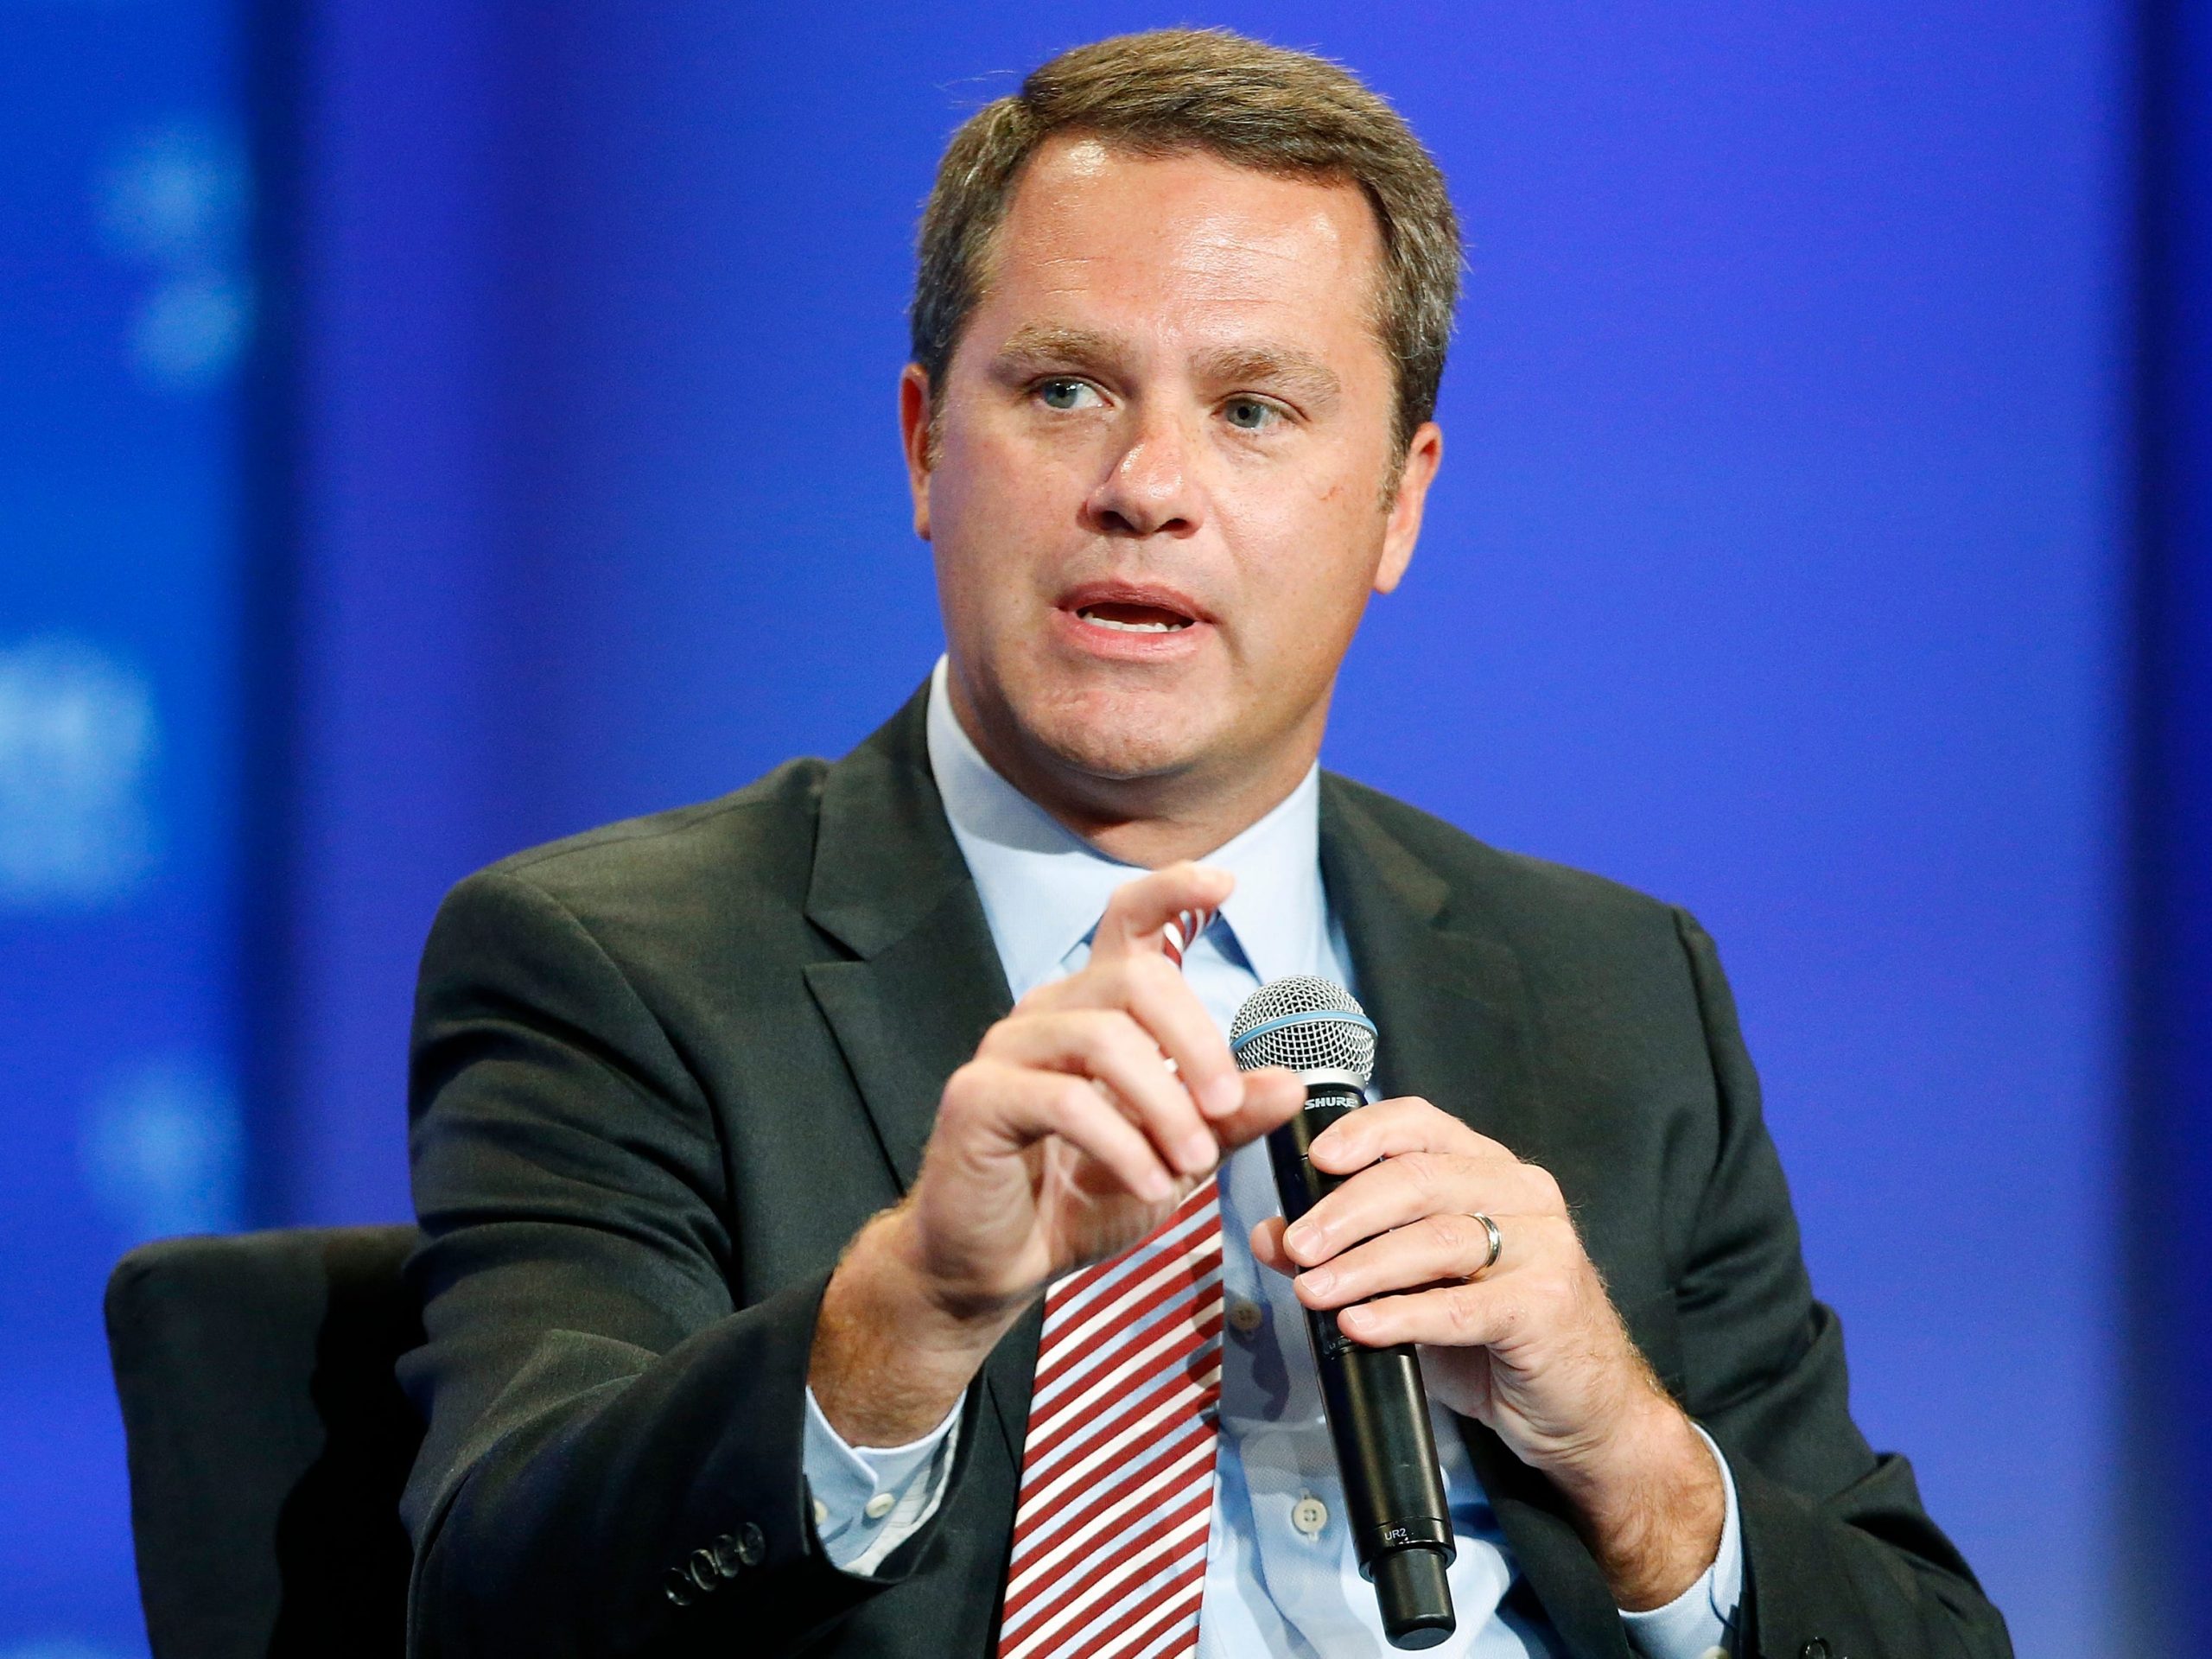 Wal-Mart CEO Doug McMillon addresses a business leader panel discussion as part of the U.S.-Africa Business Forum in Washington